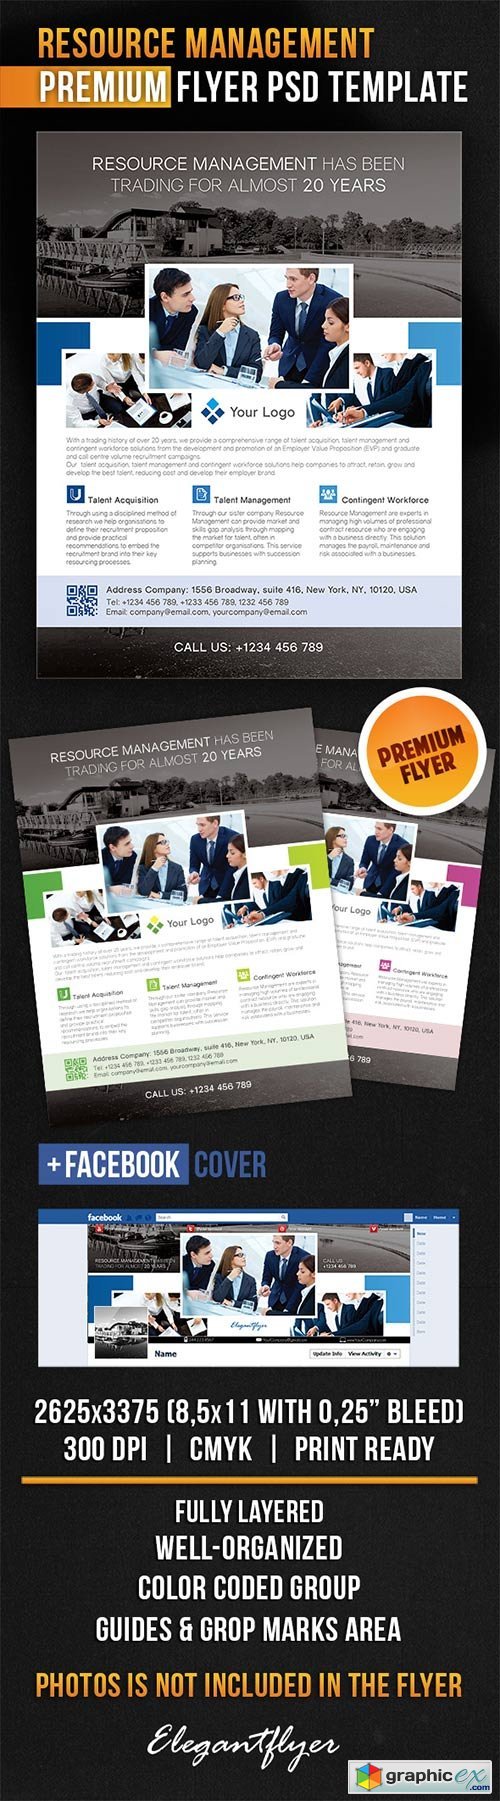 Resource Management Flyer PSD Template + Facebook Cover